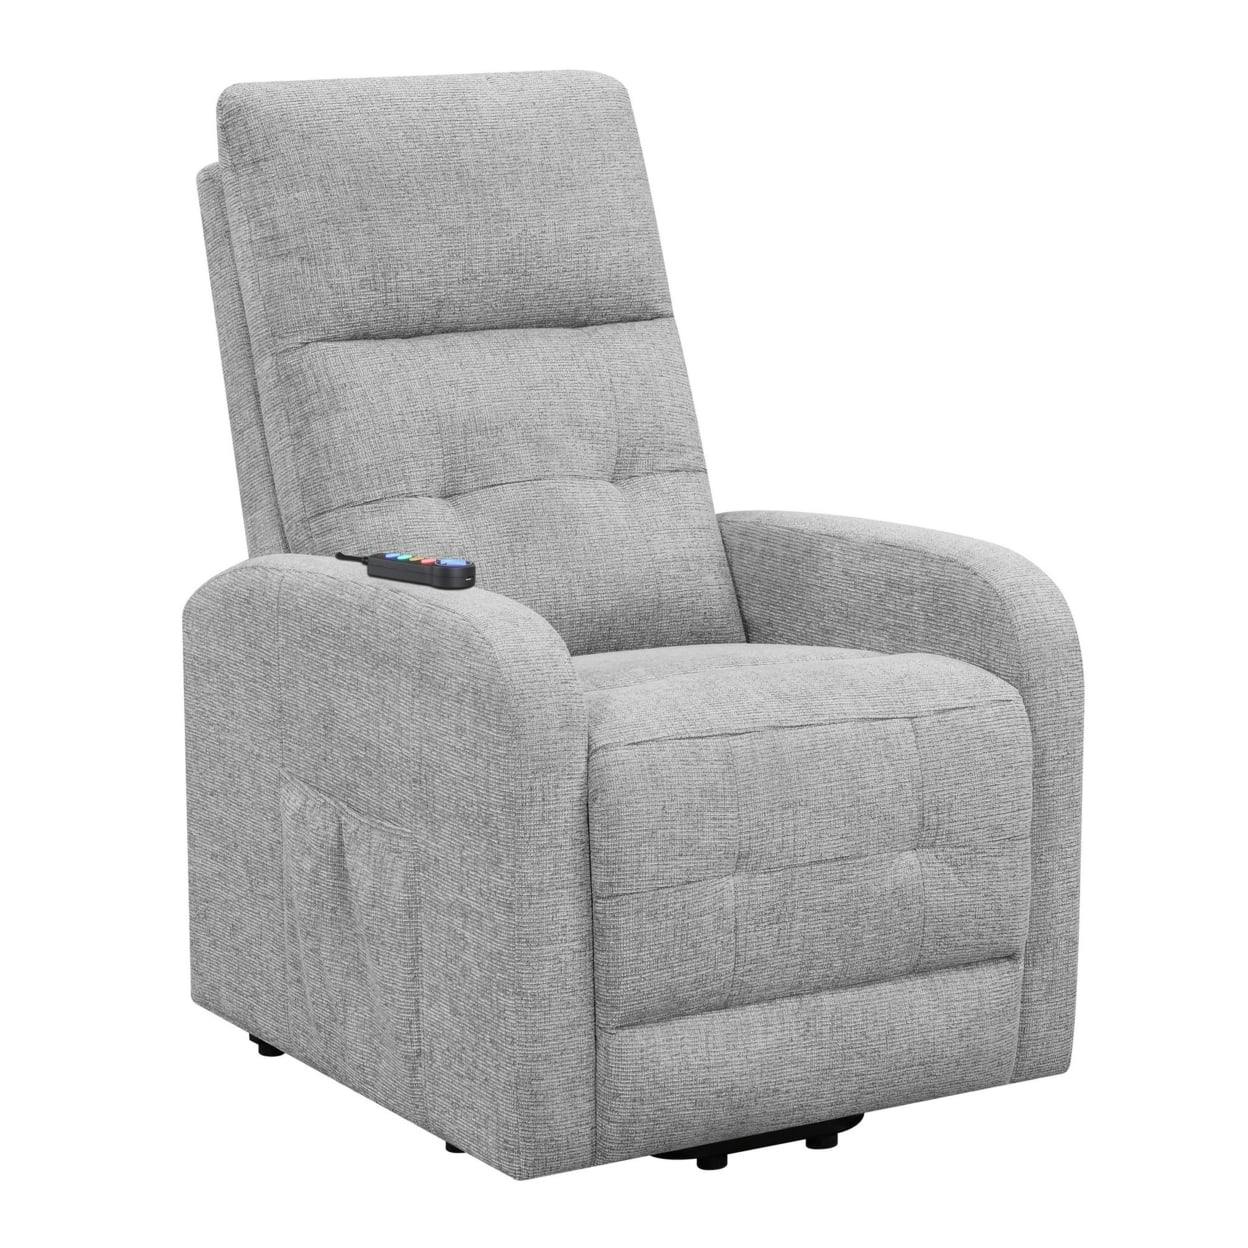 Transitional Gray Power Lift Massage Recliner with USB Ports